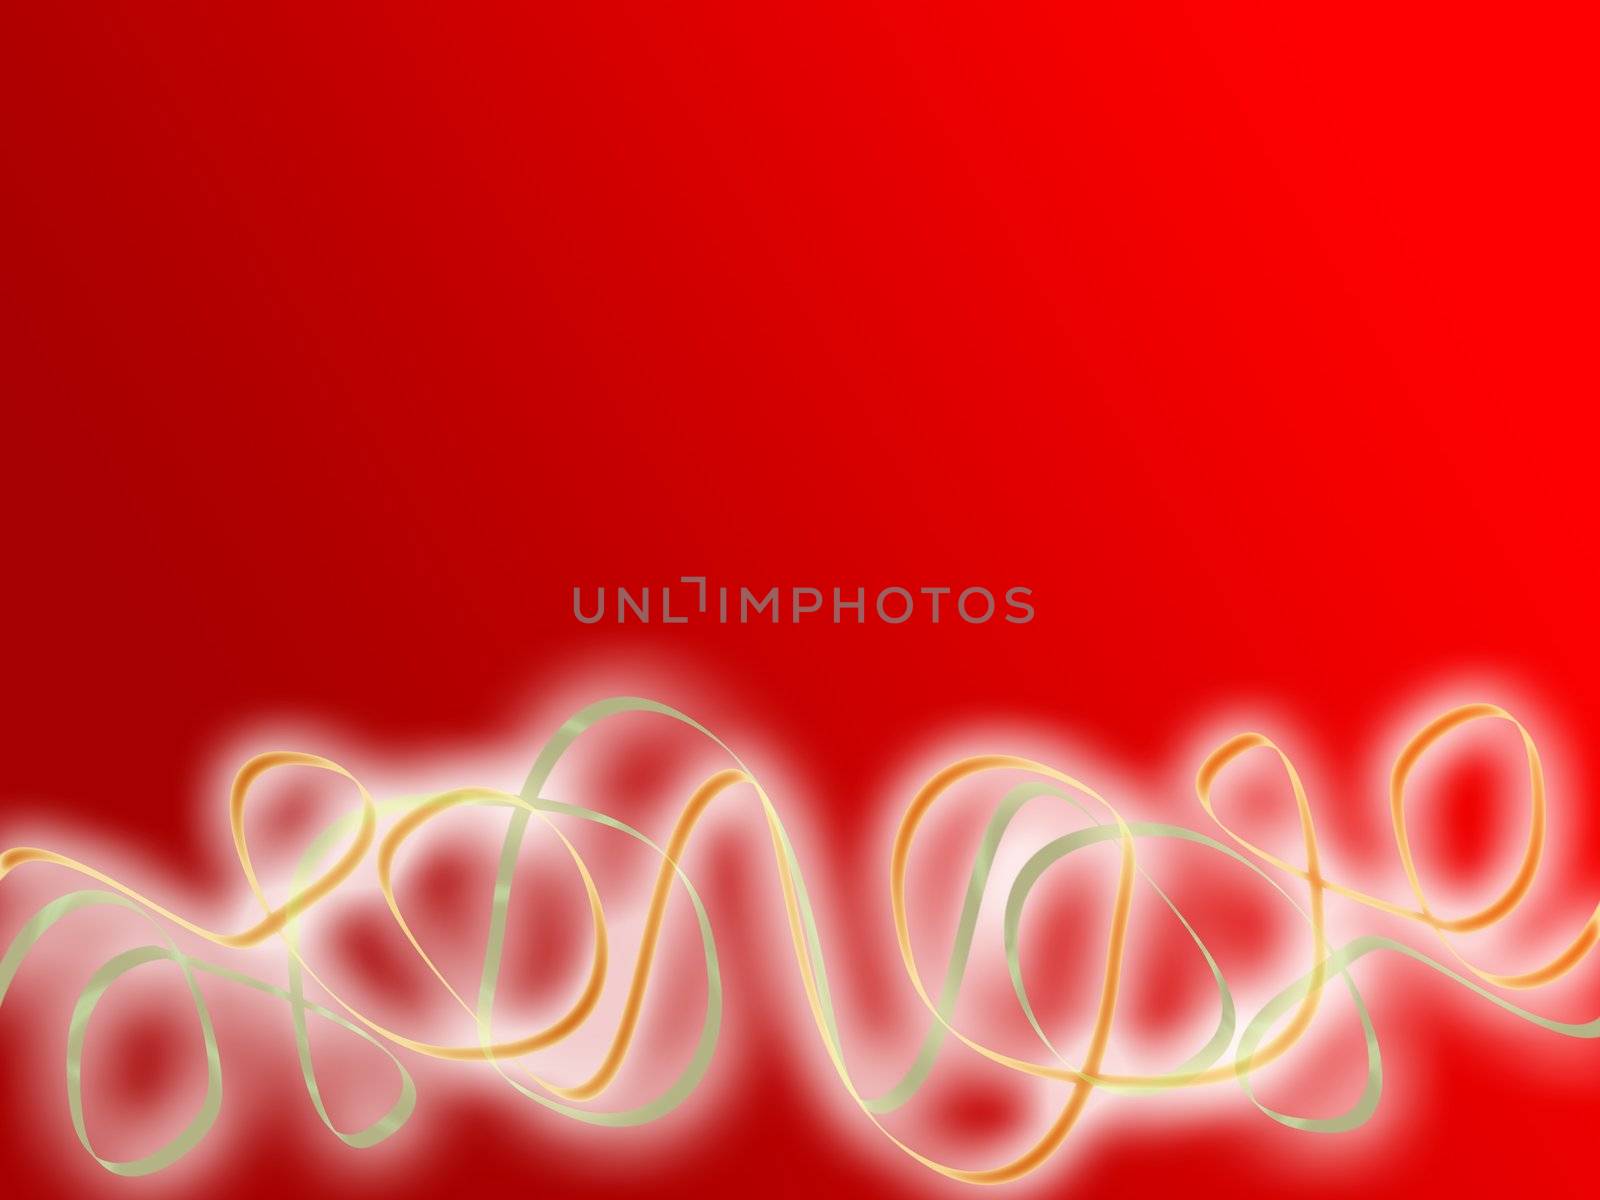 Party ribbons on red background by tommroch